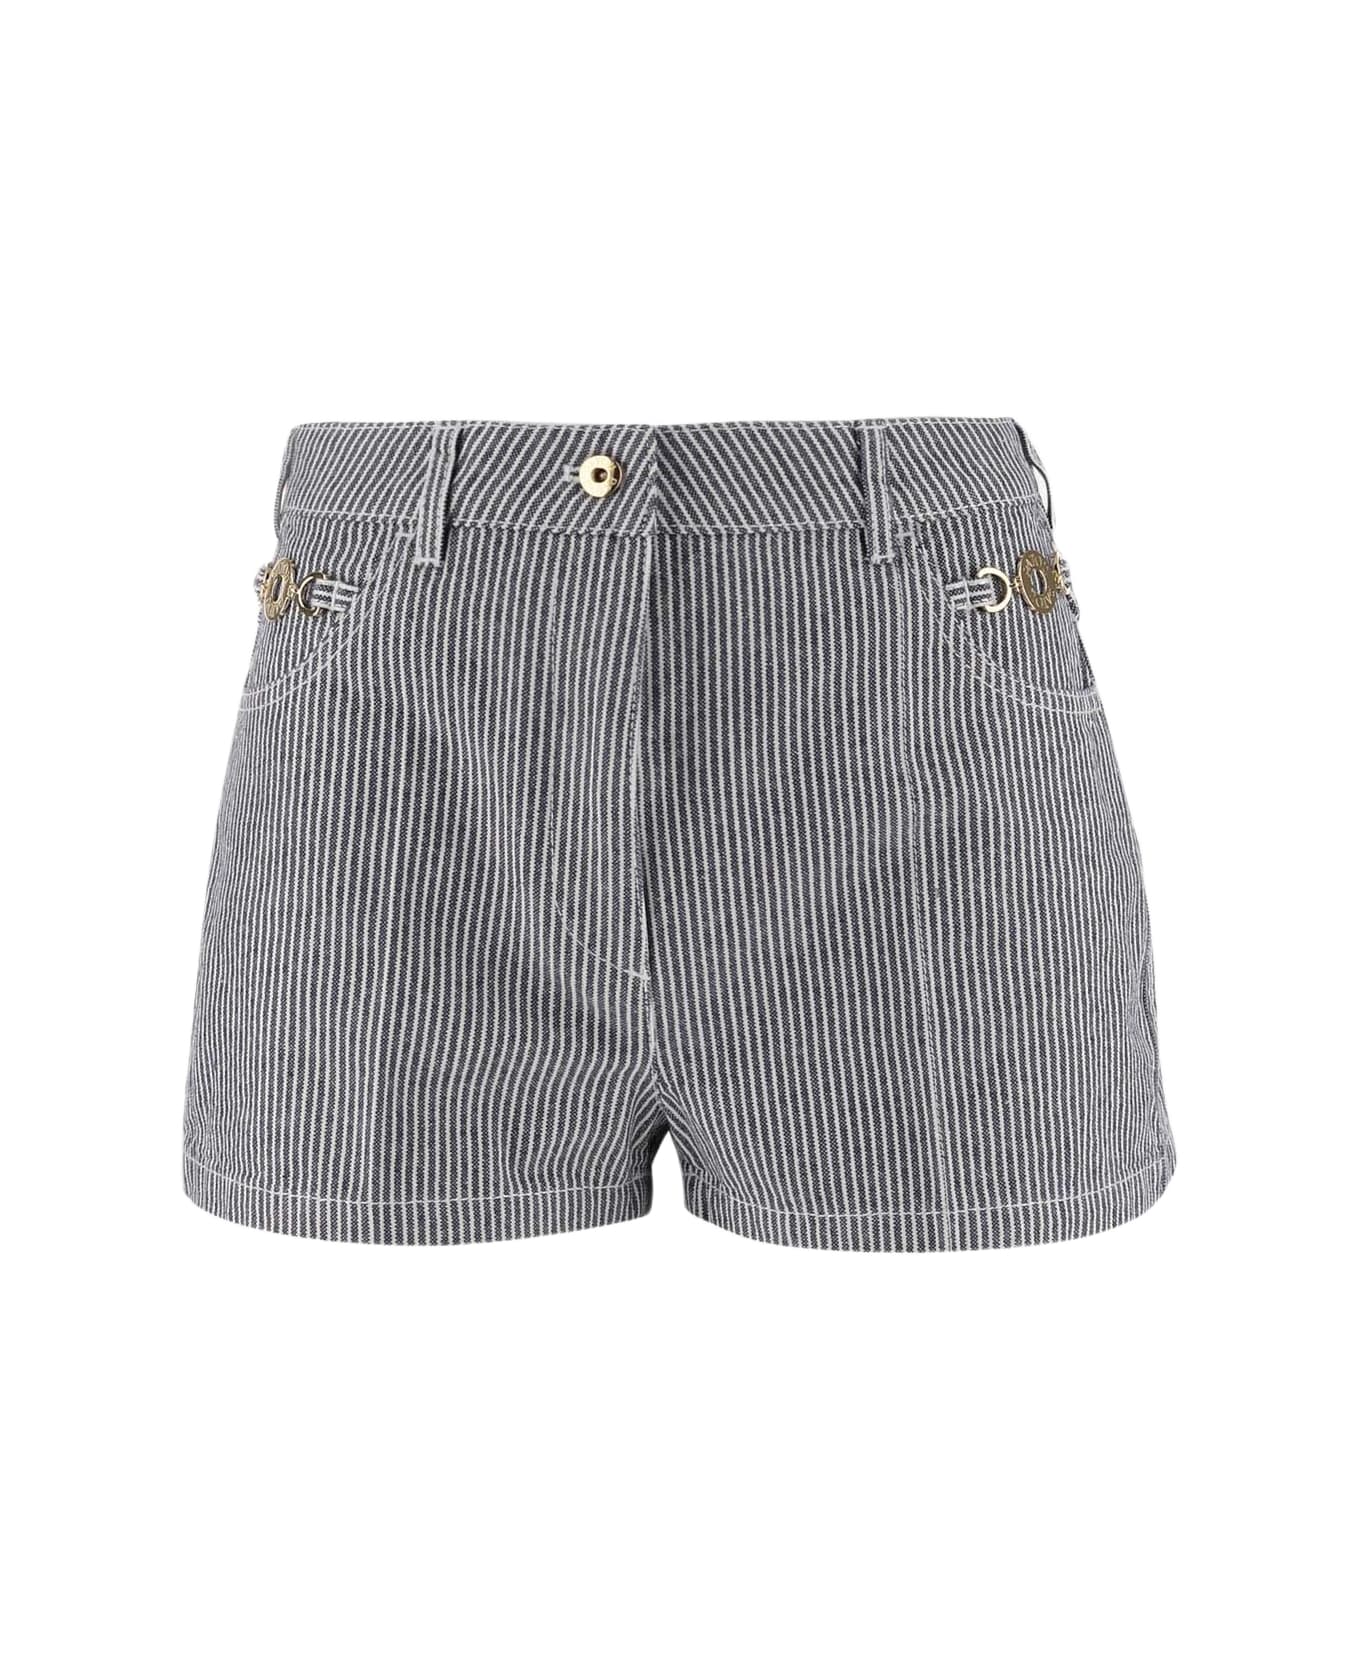 Patou Cotton Short Trousers With Striped Pattern - Navy Striped ショートパンツ